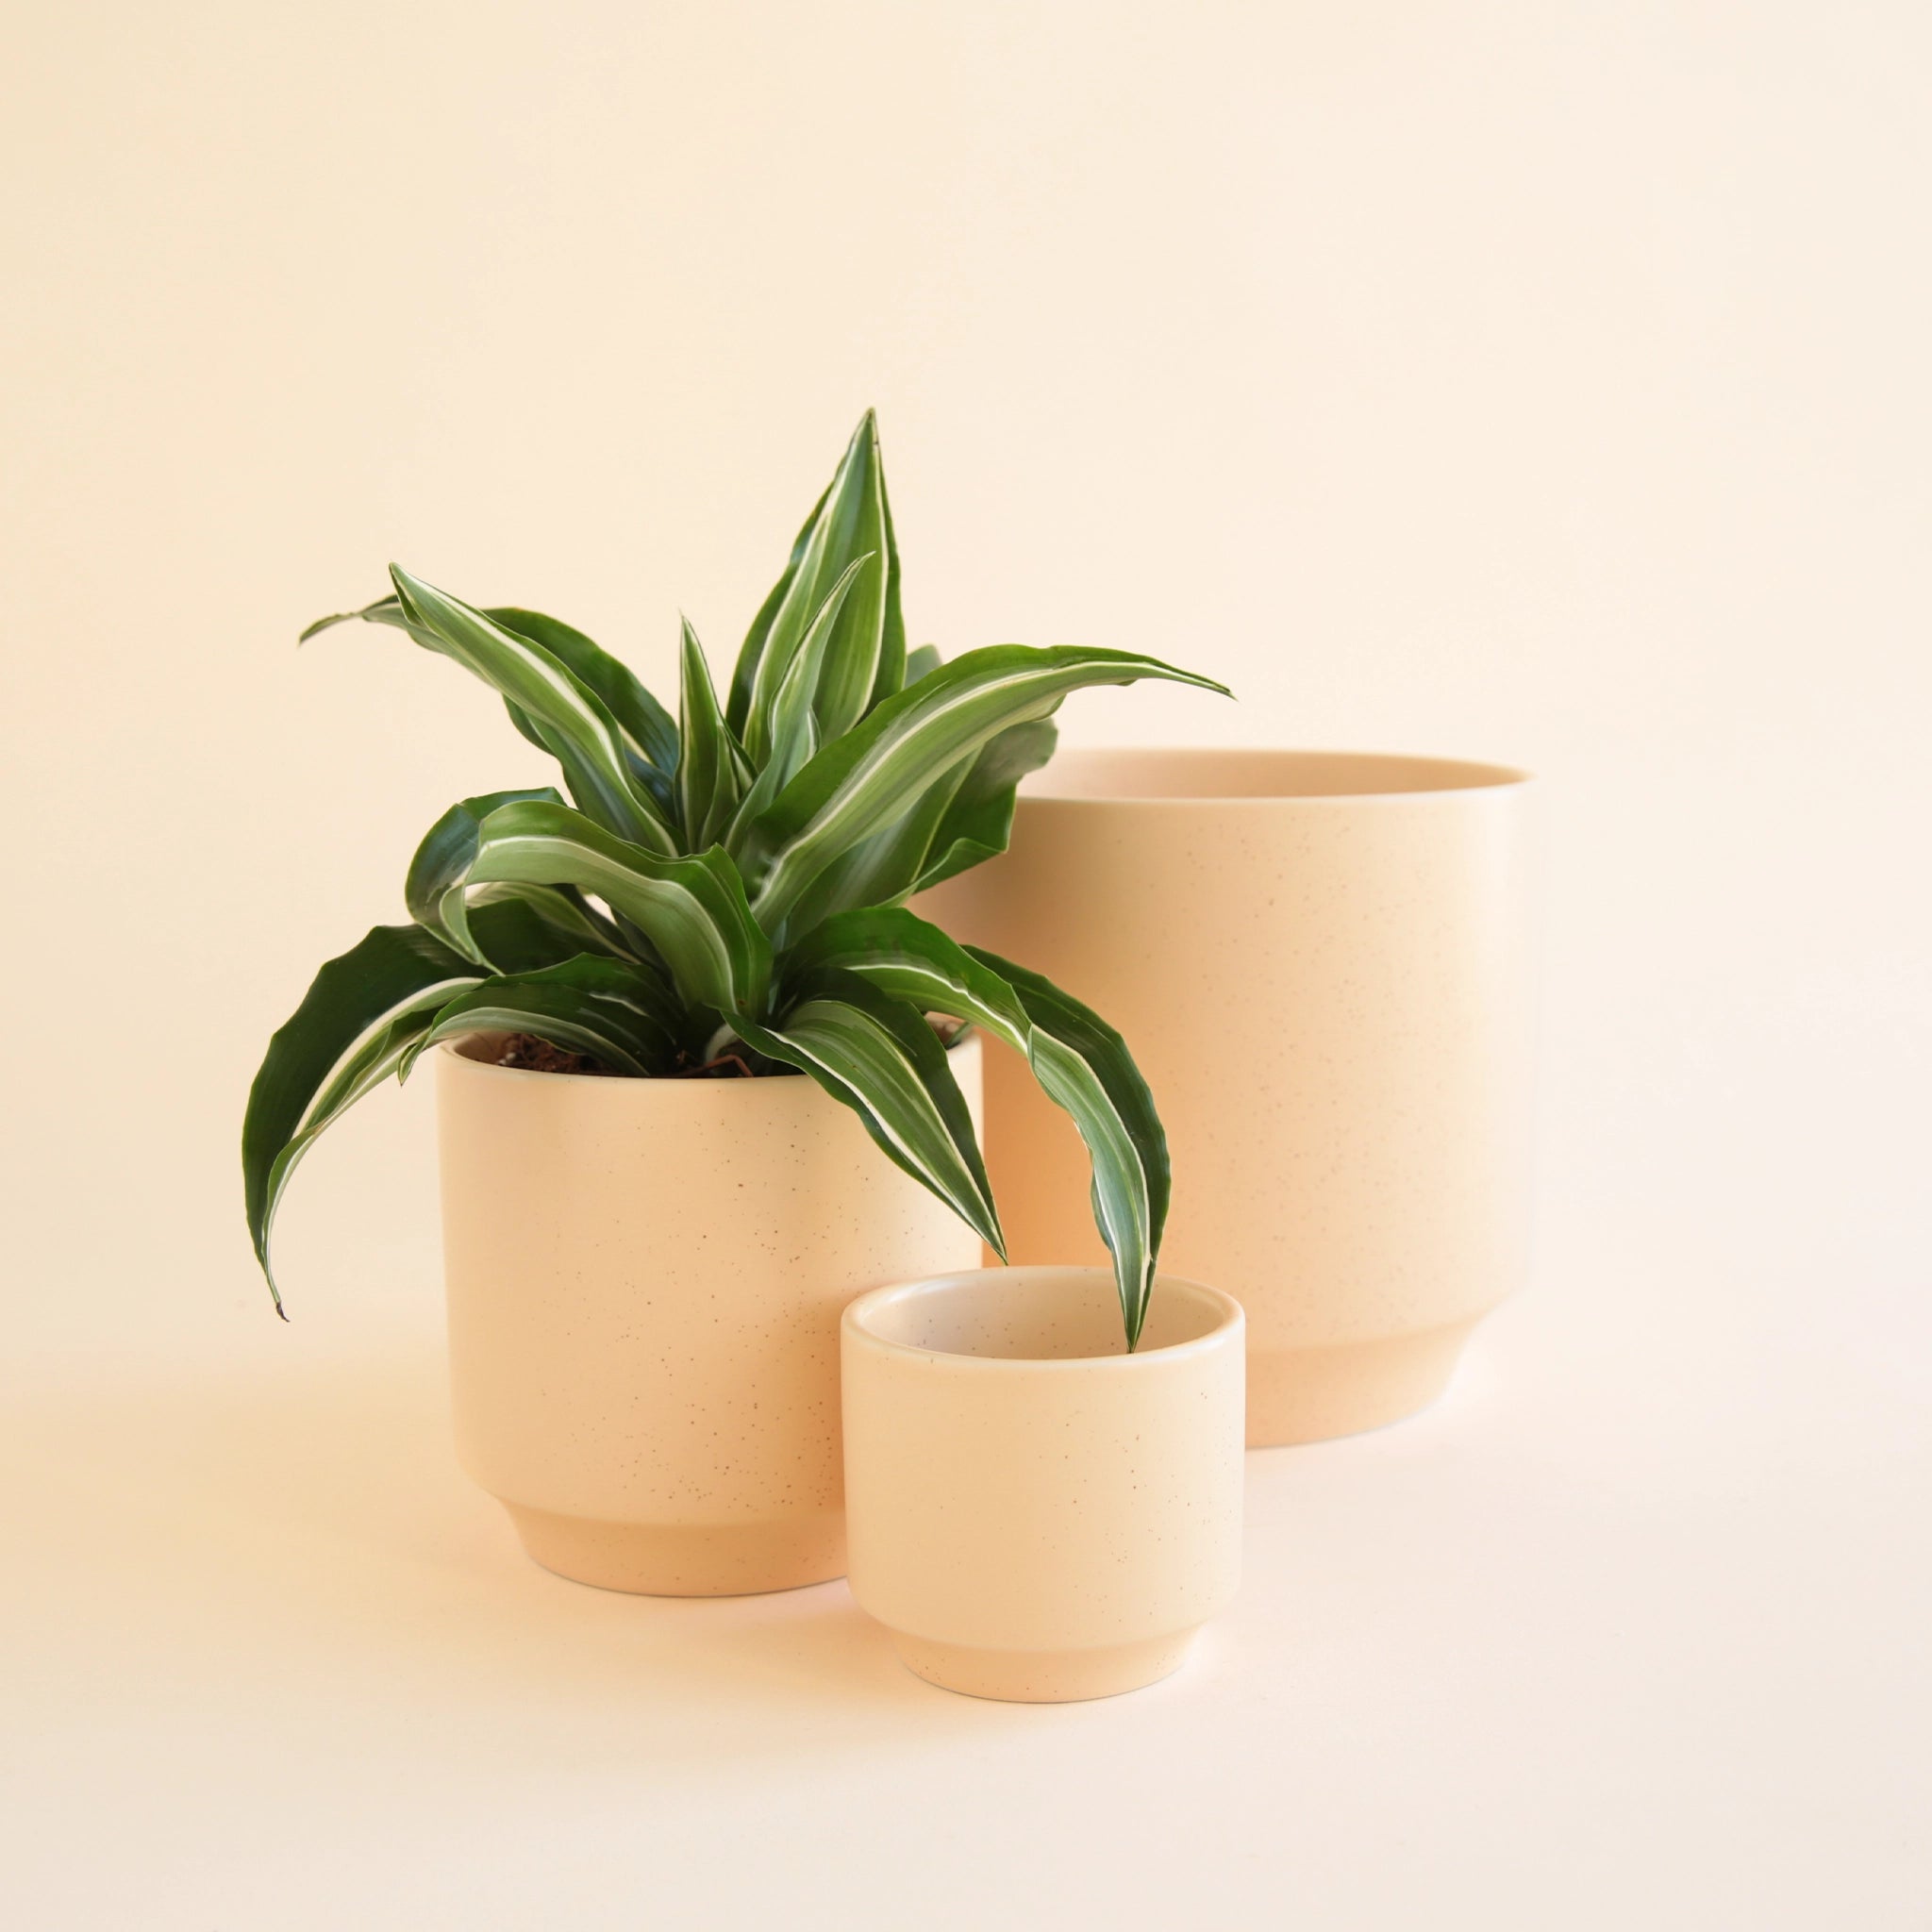 On an ivory background is three different sized ceramic planters in a neutral tan shade with a slight speckle and a tapered bottom. 